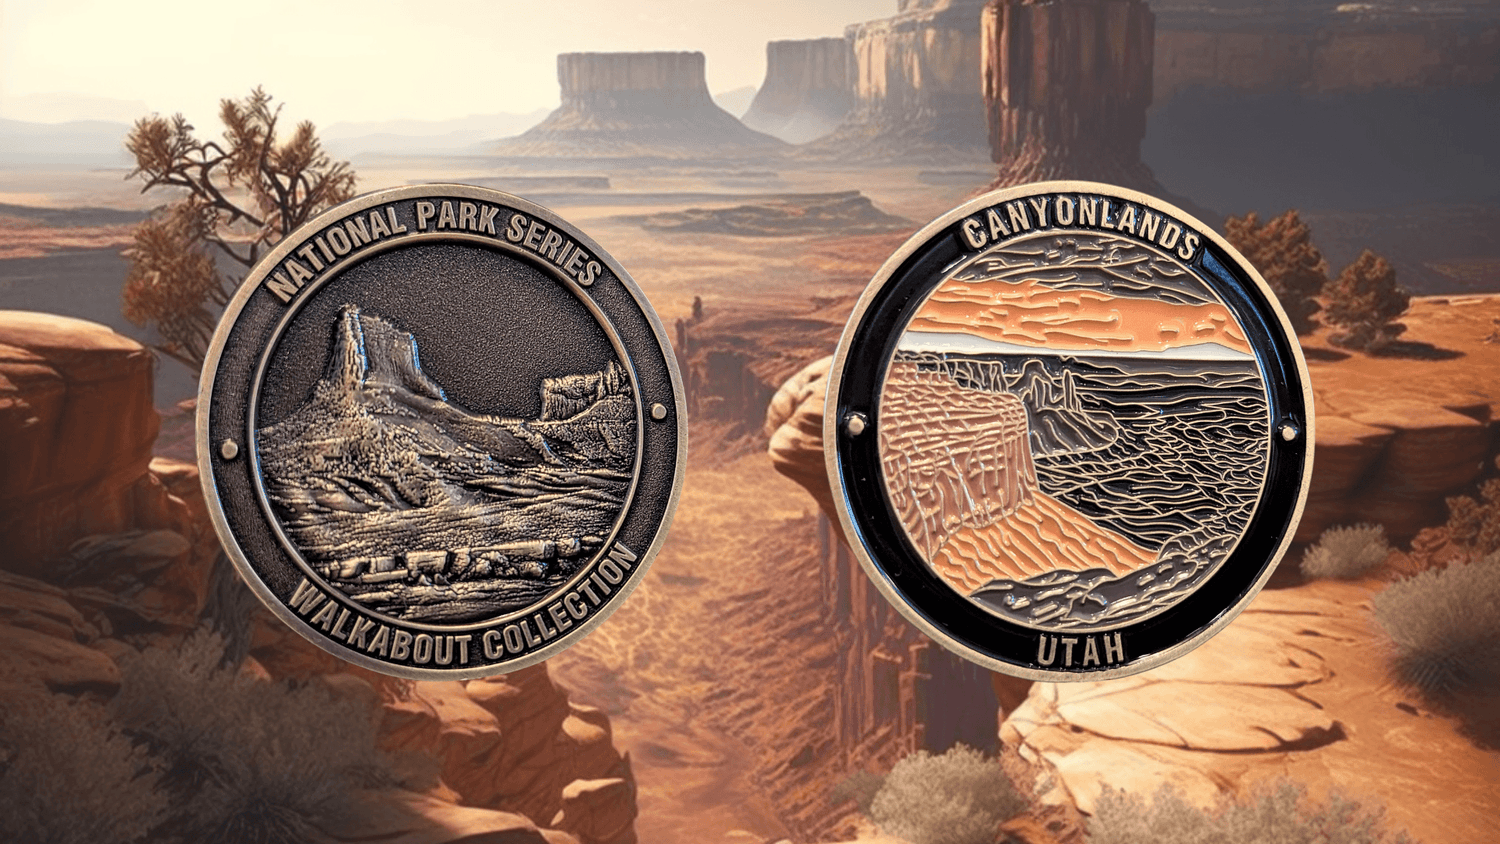 CANYONLANDS NATIONAL PARK CHALLENGE COIN